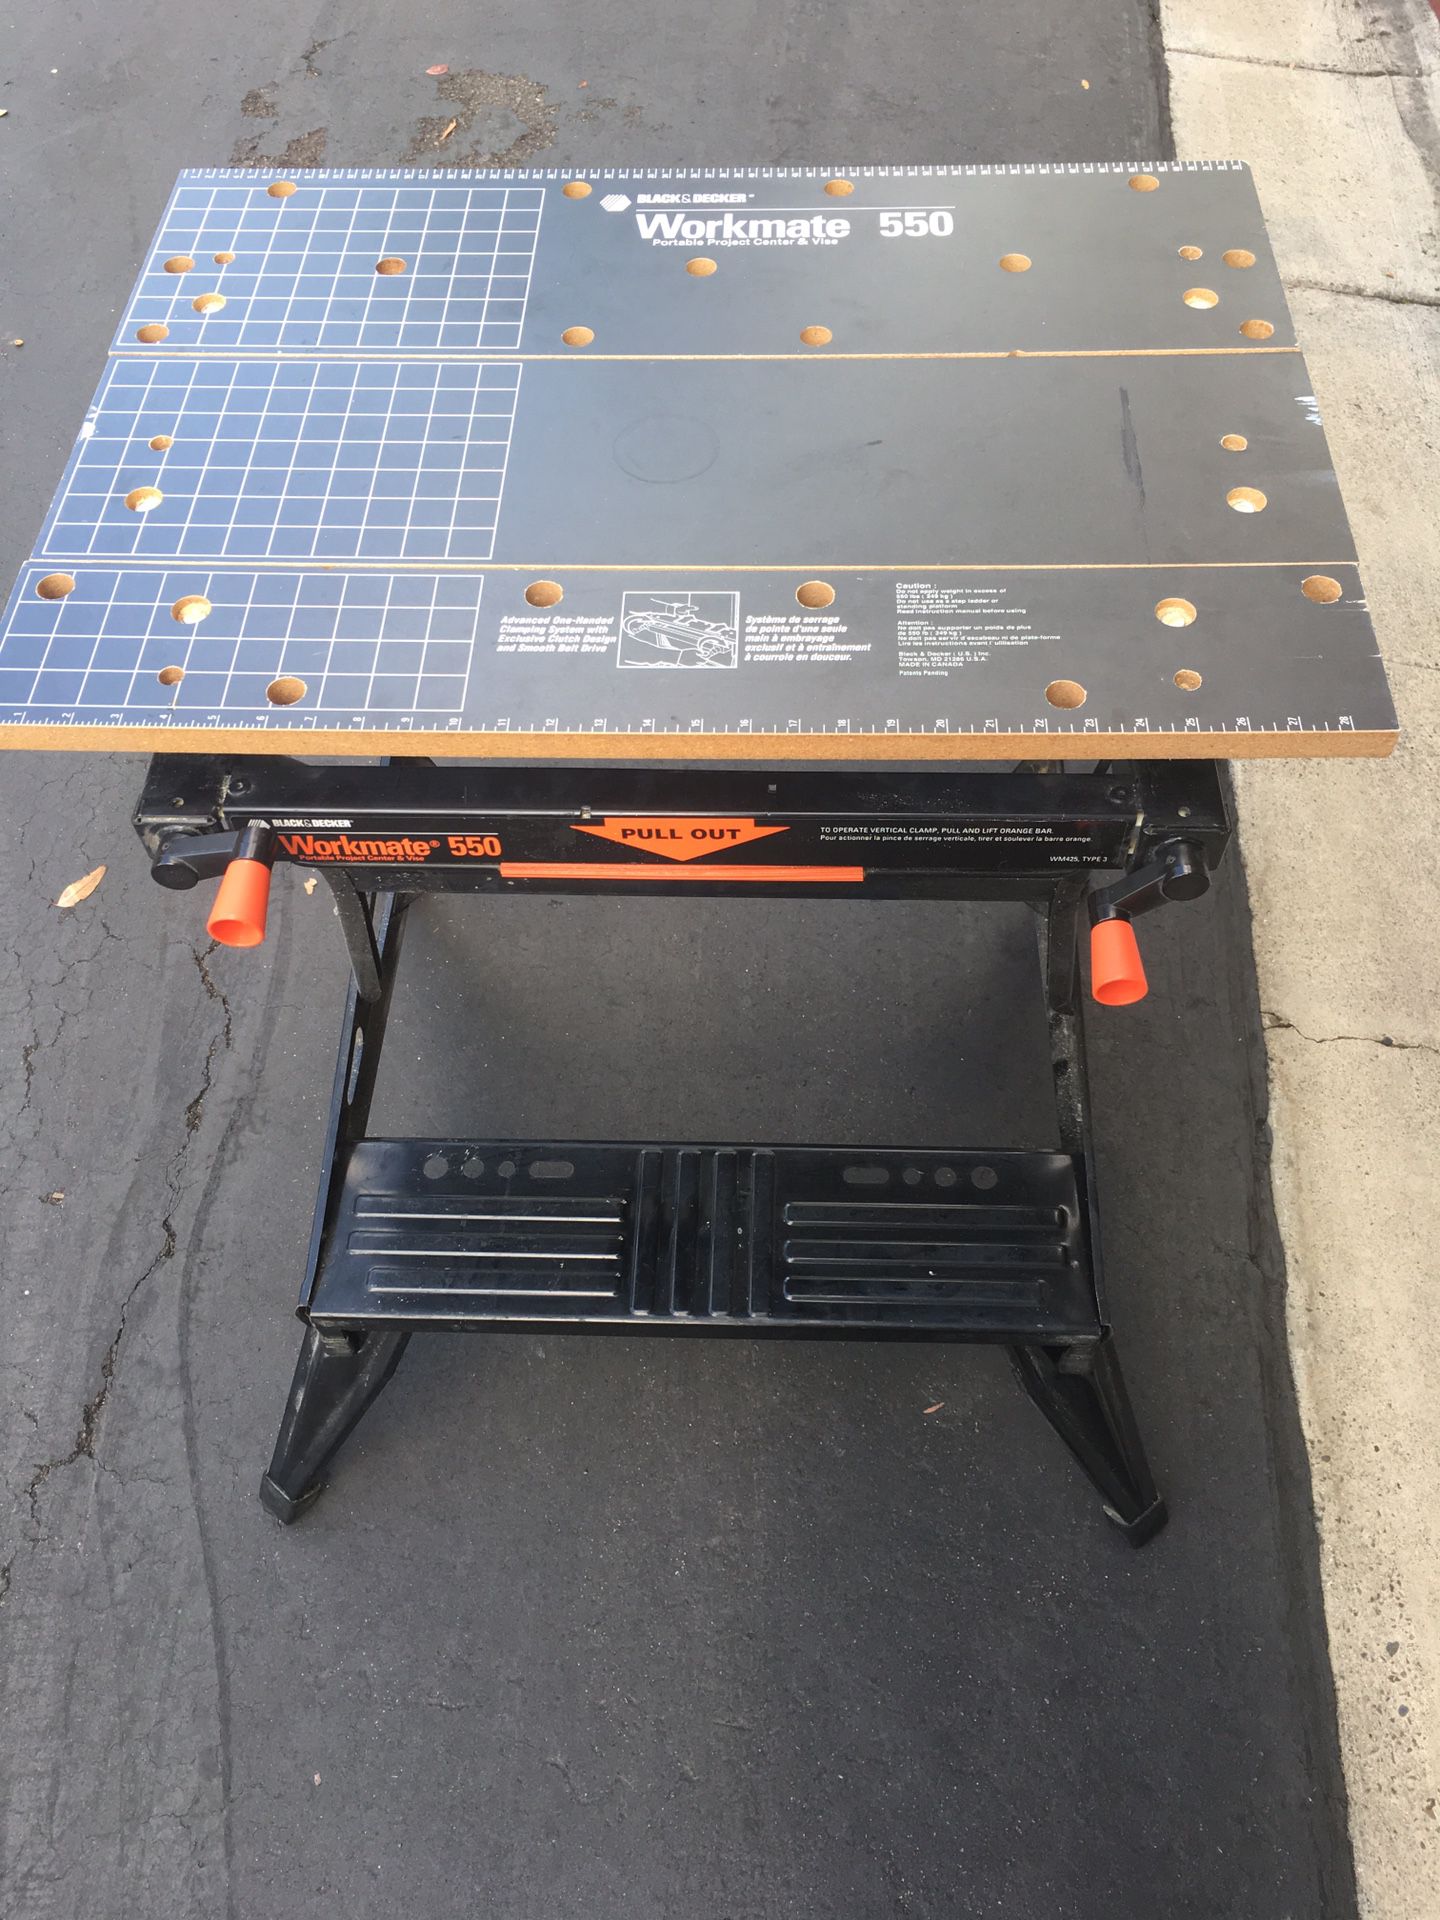 BLACK+DECKER Ready to Build Workbench Toy for Sale in Melrose Park, IL -  OfferUp